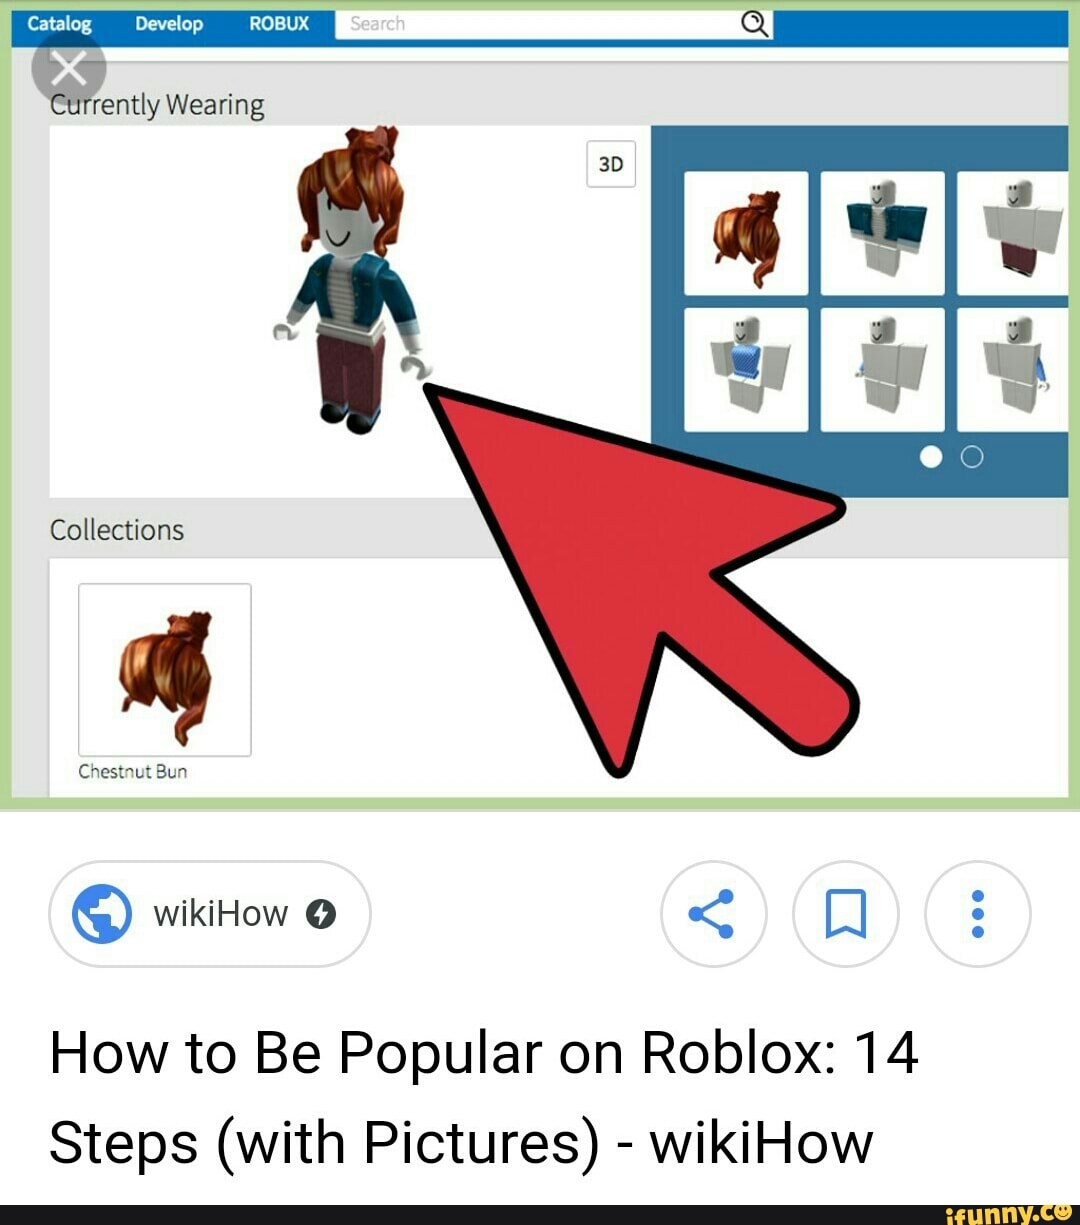 How To Be Popular On Roblox 14 Steps With Pictures Wikihow Ifunny - how to be popular on roblox 10 steps with pictures wikihow